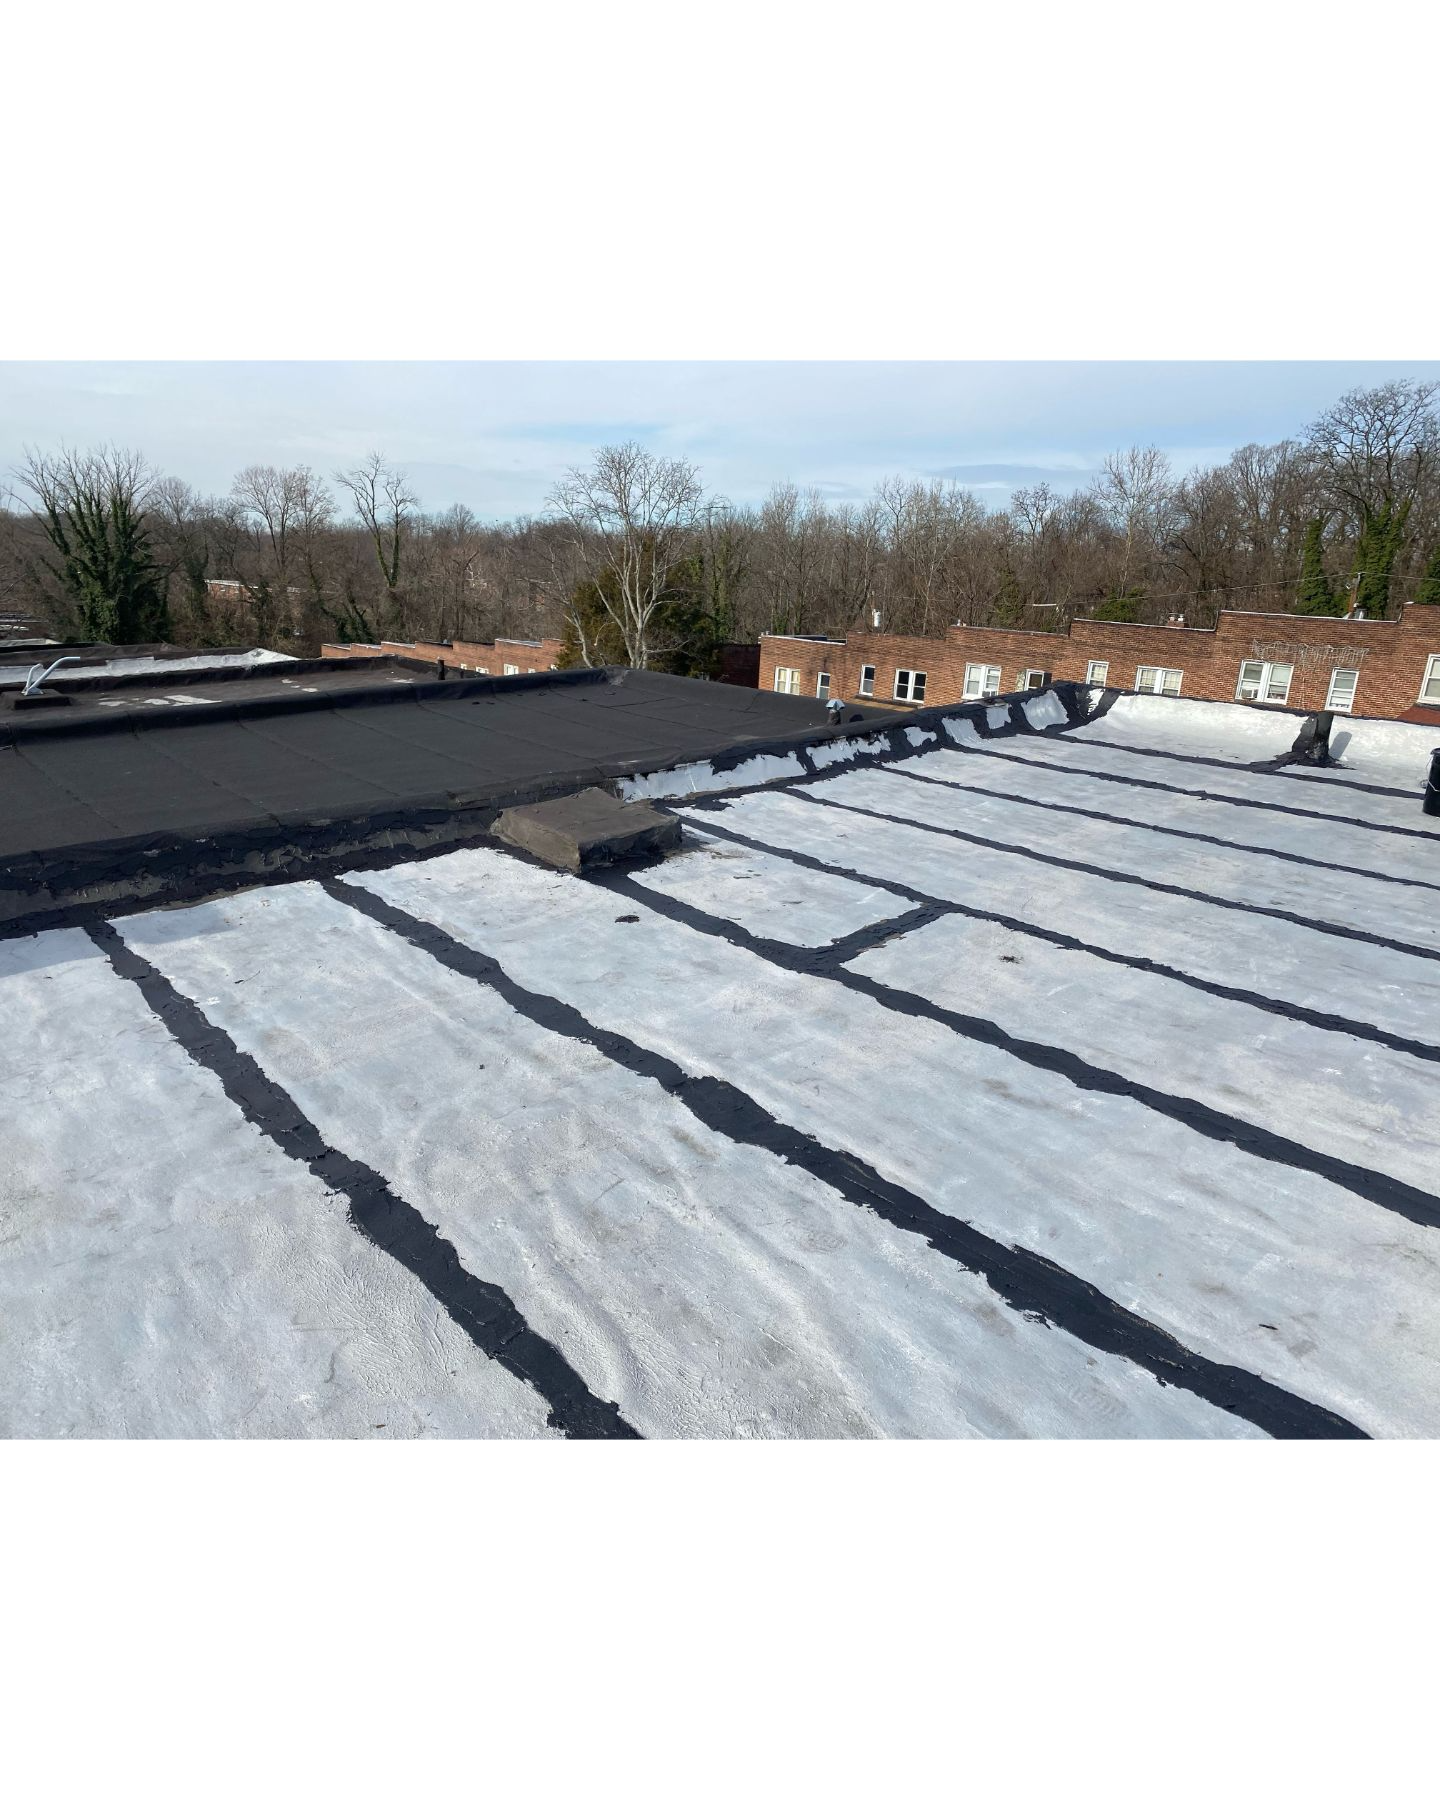 Flat roof repair. Stopped water damage from coming in through the seams on the rolled roof.